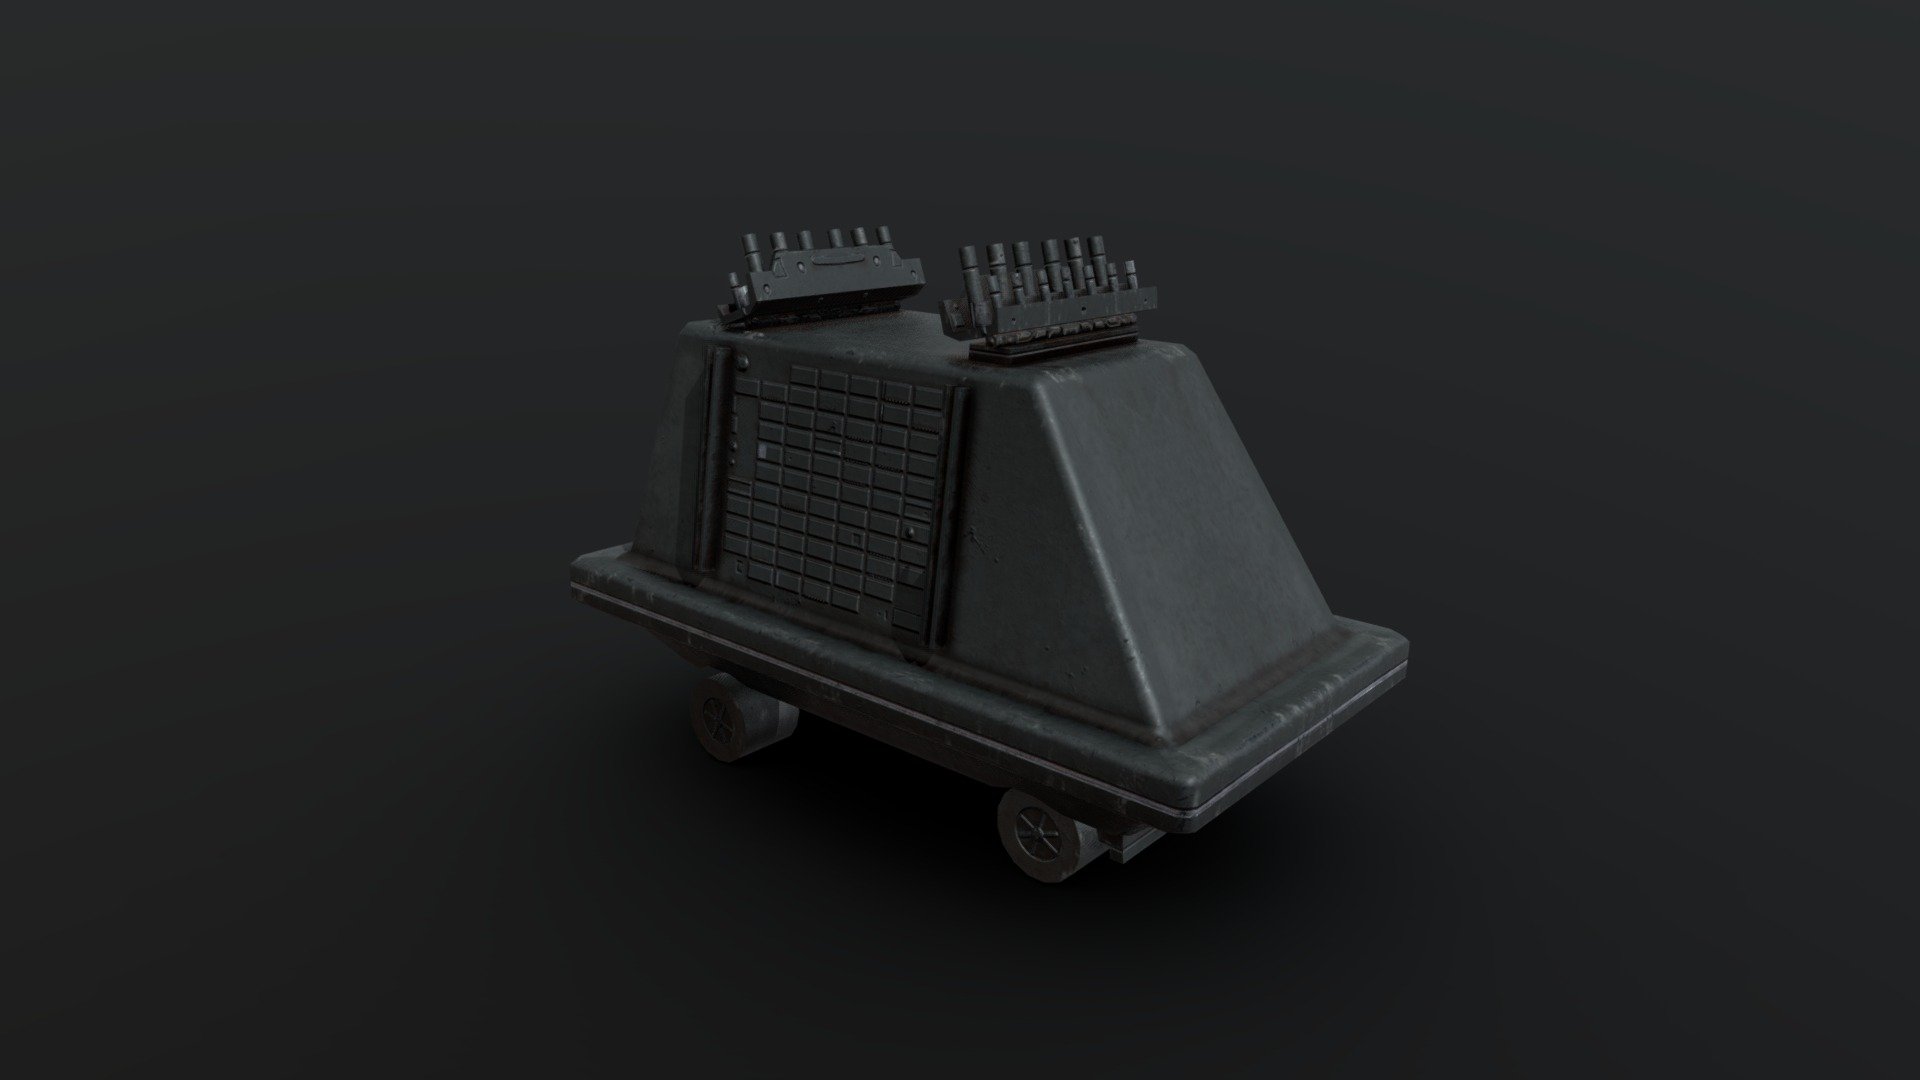 It's a mouse droid! As seen in Star Wars driving along imperial corridors. Or an &ldquo;MSE-6 series repair droid,